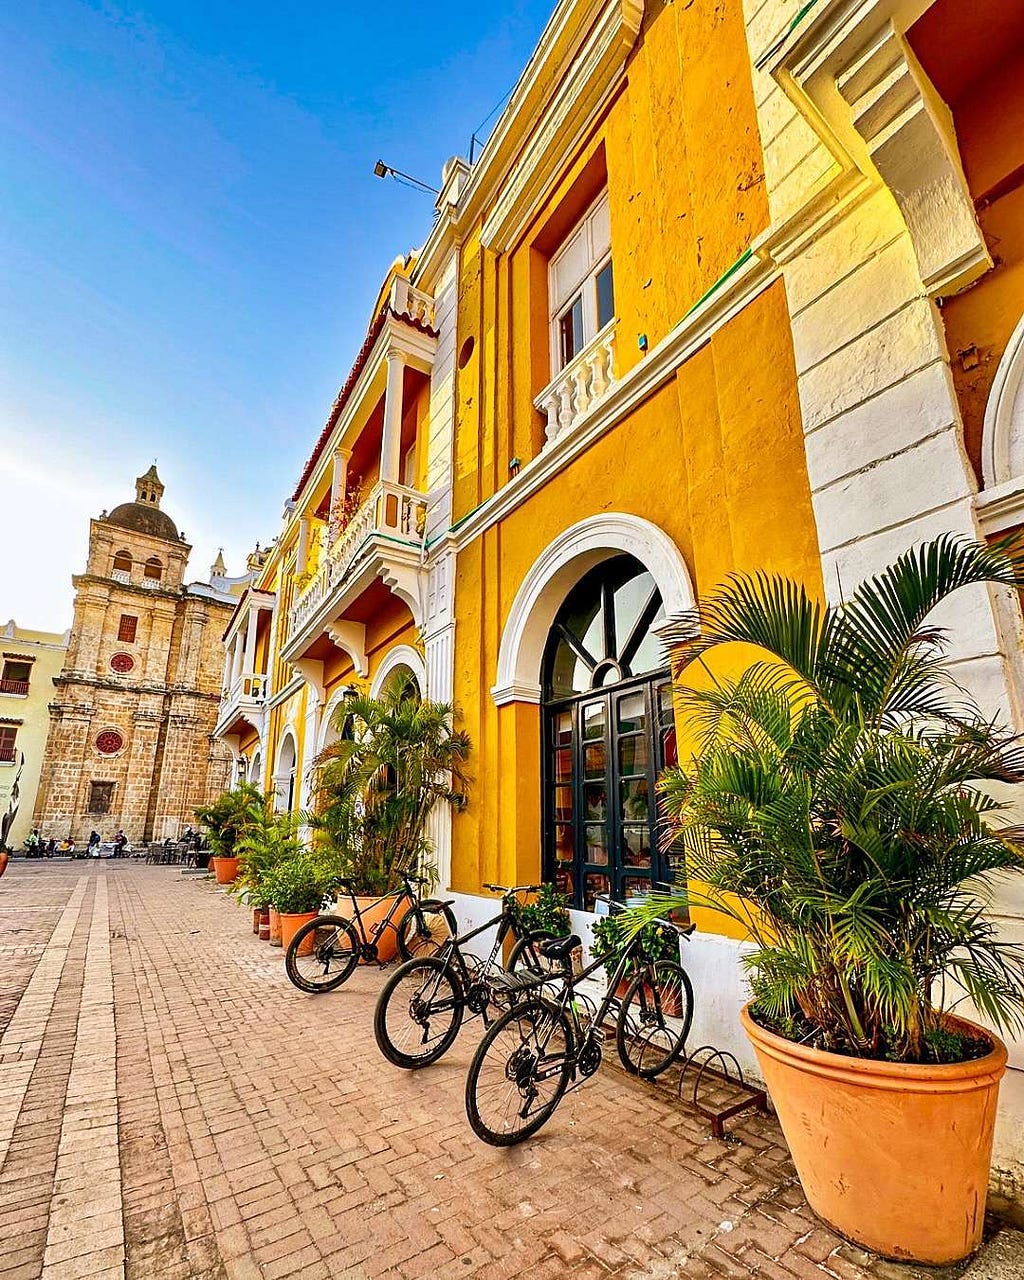 A row of yellow and white buildings with arched windows, potted plants, and bicycles lined up on a cobblestone street in Cartagena, Colombia, with a stone tower in the background, under a clear blue sky.